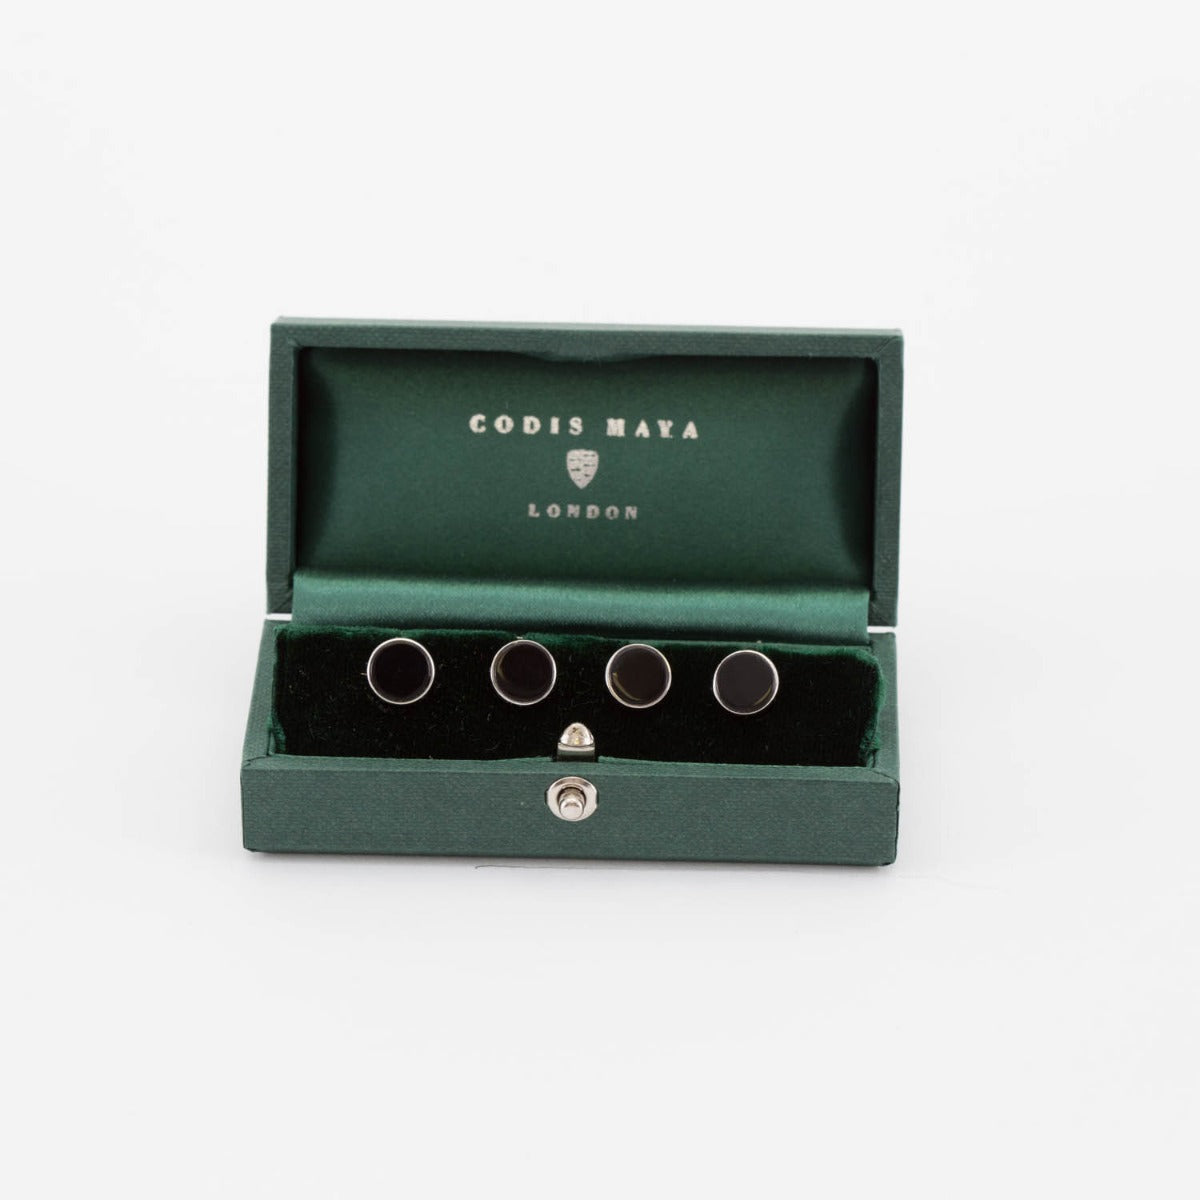 An ethically sourced Rhodium Plated Onyx Stud set of cufflinks in a green box from KirbyAllison.com.